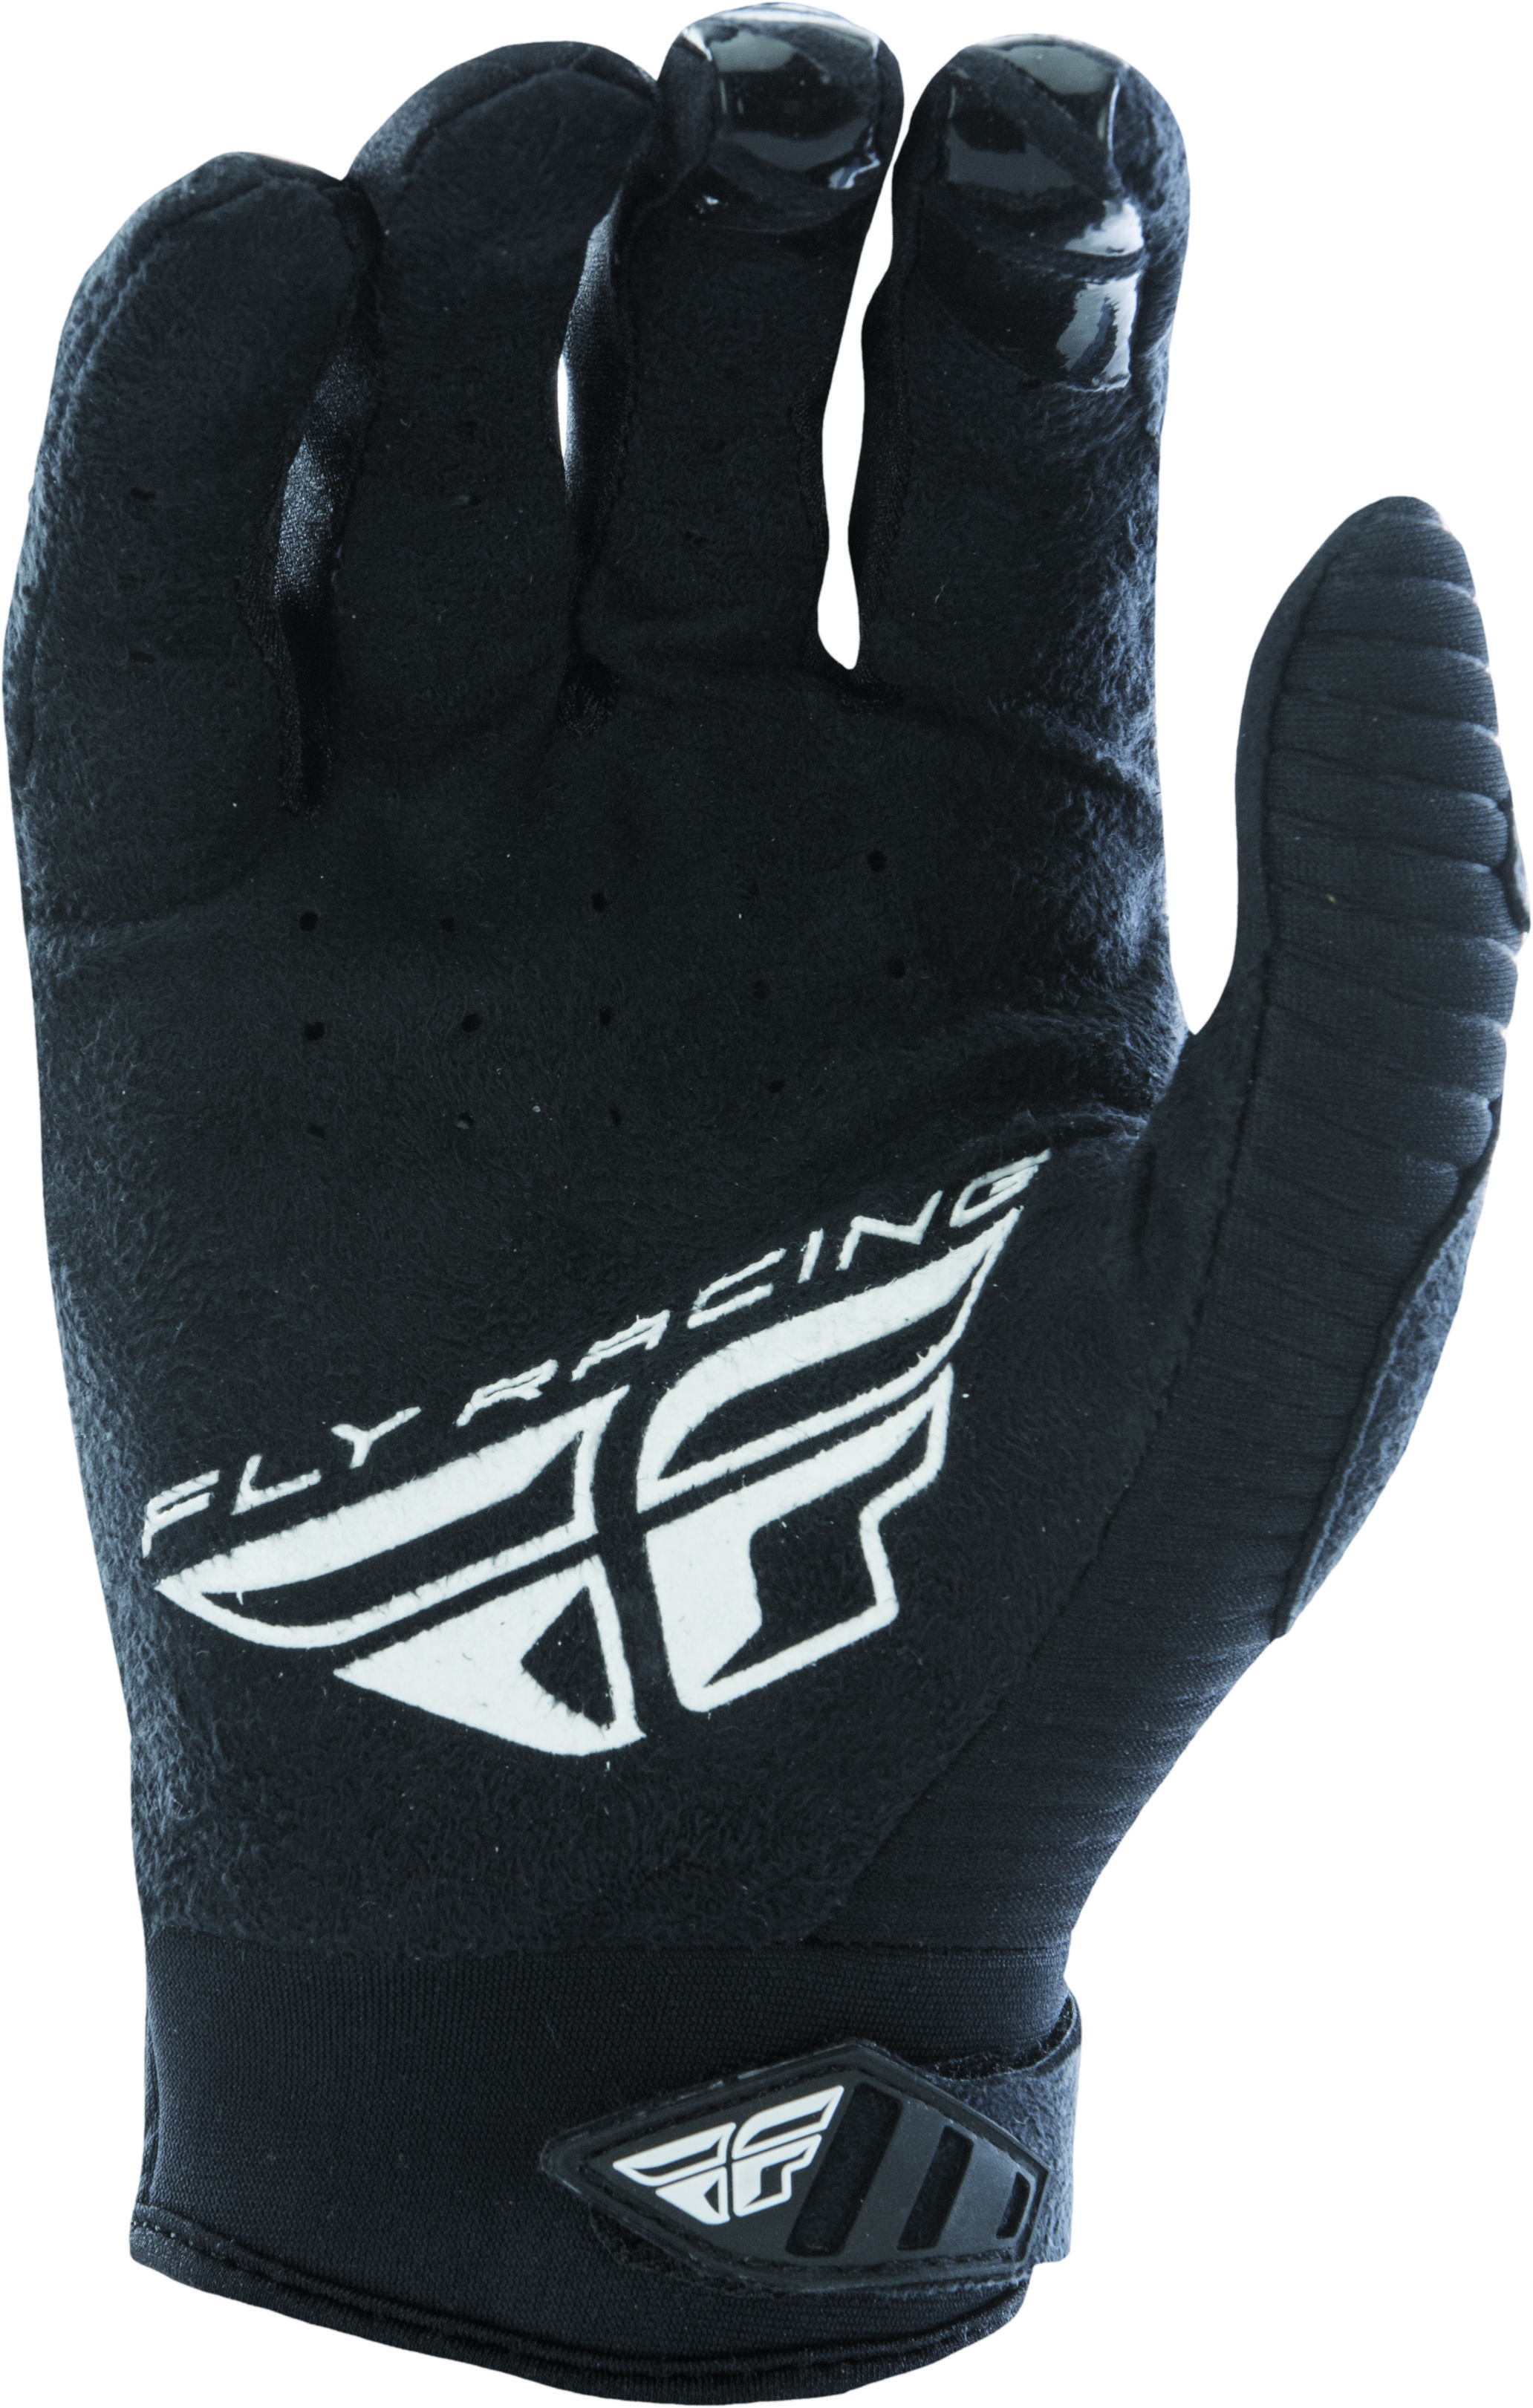 Patrol Xc Lite Riding Gloves For MX & Off-Road Black Size 12 - Click Image to Close